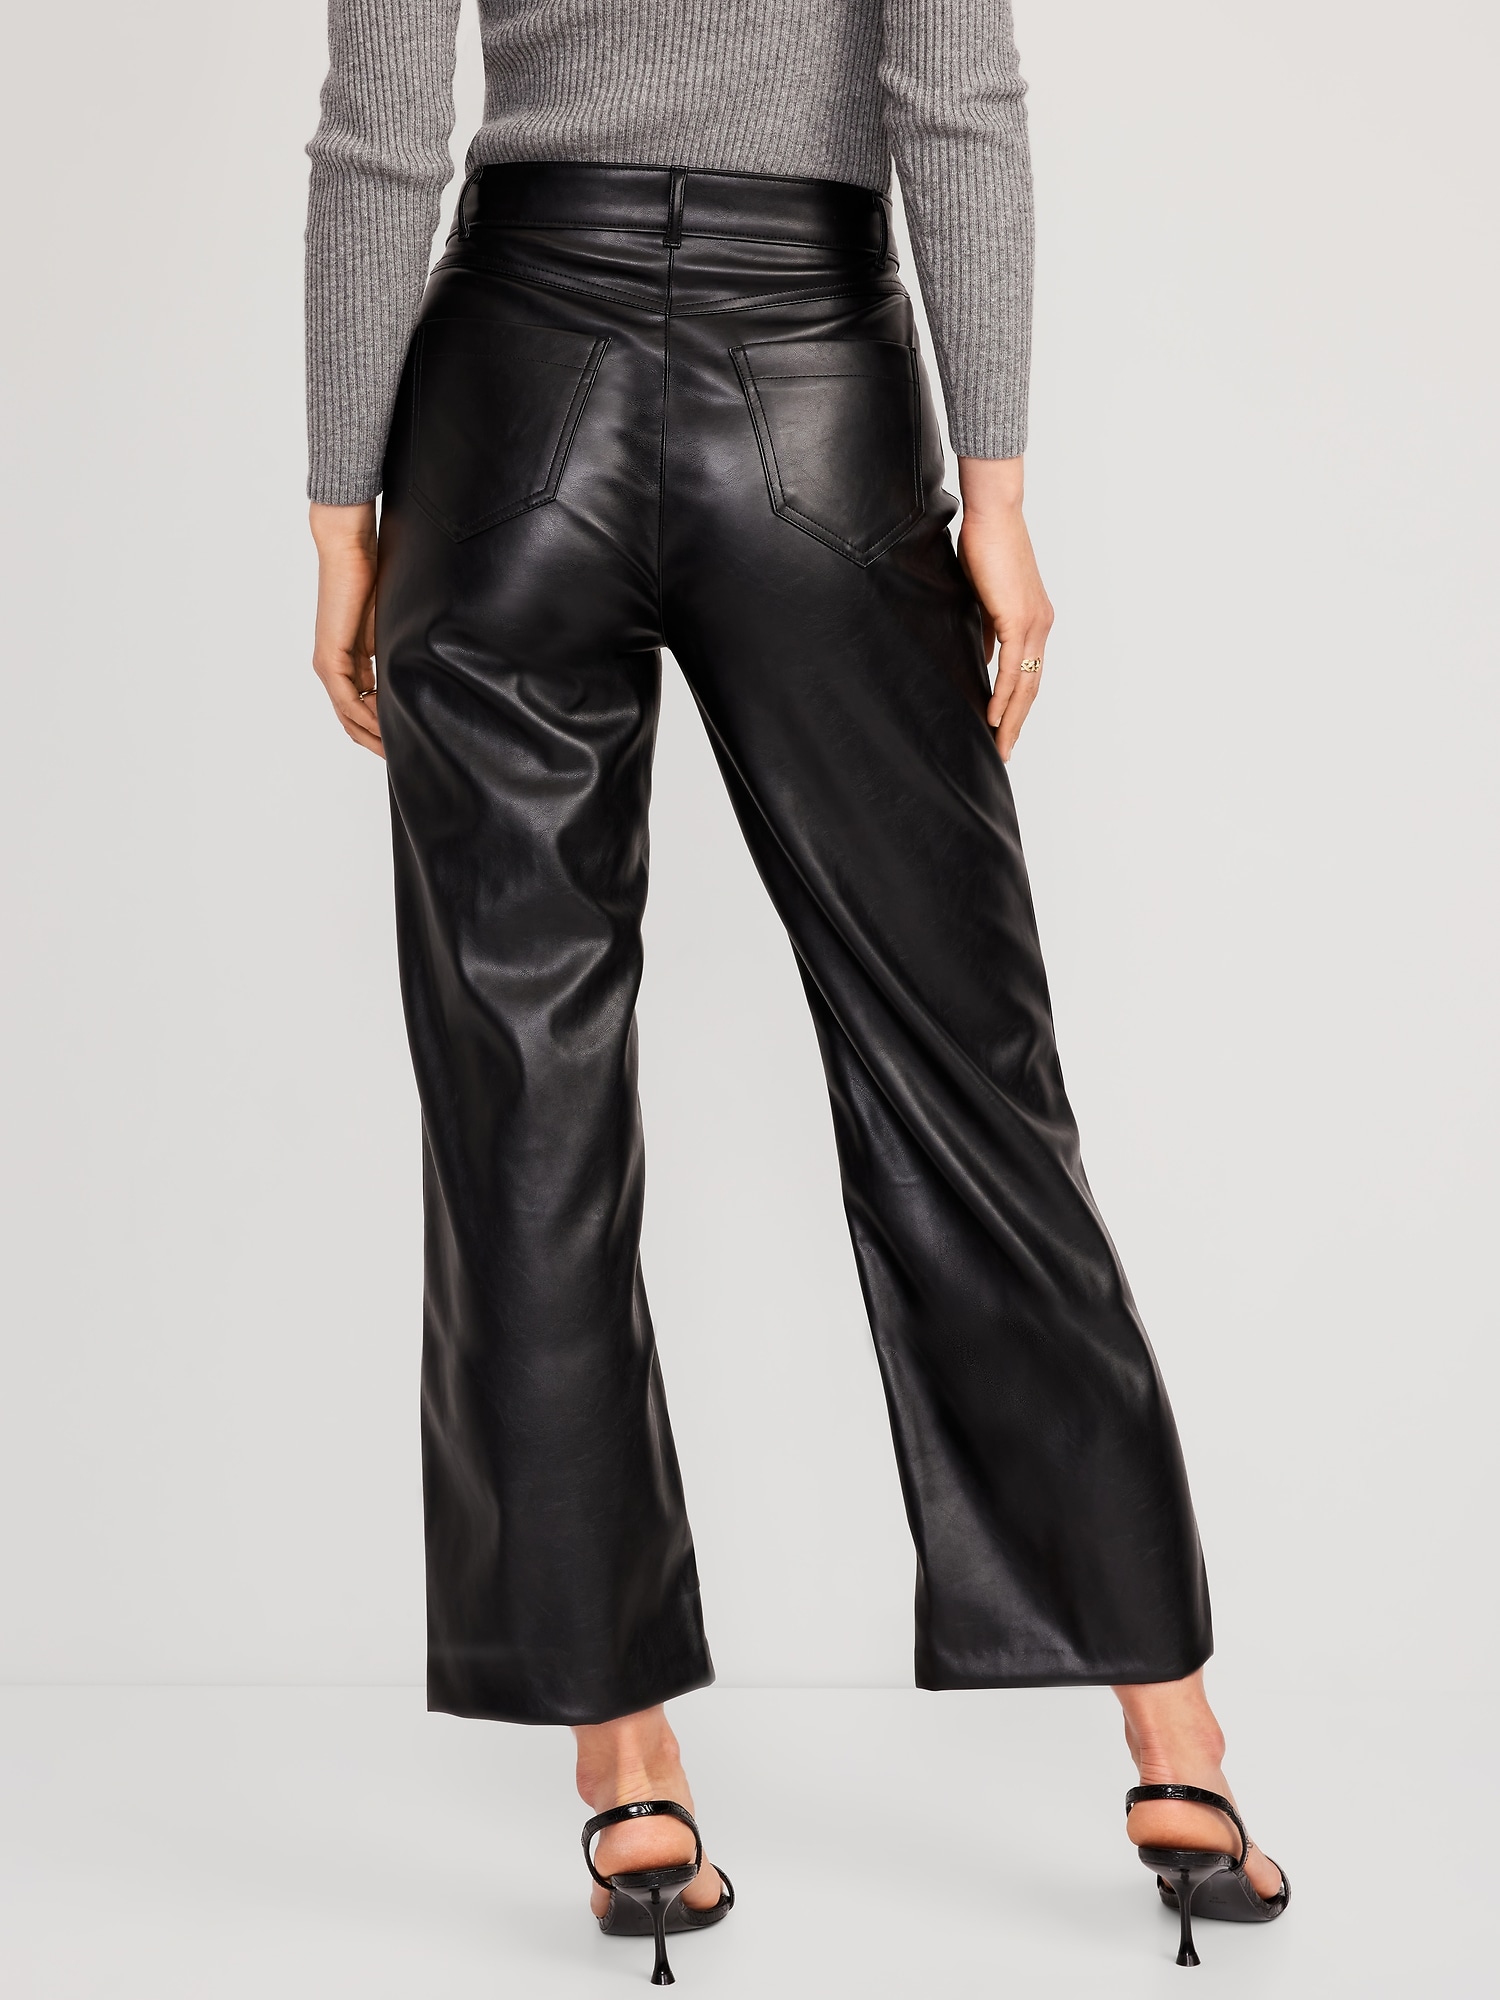 TE-QUIERO HIGH RISE VEGAN LEATHER WIDE LEG PANT WITH